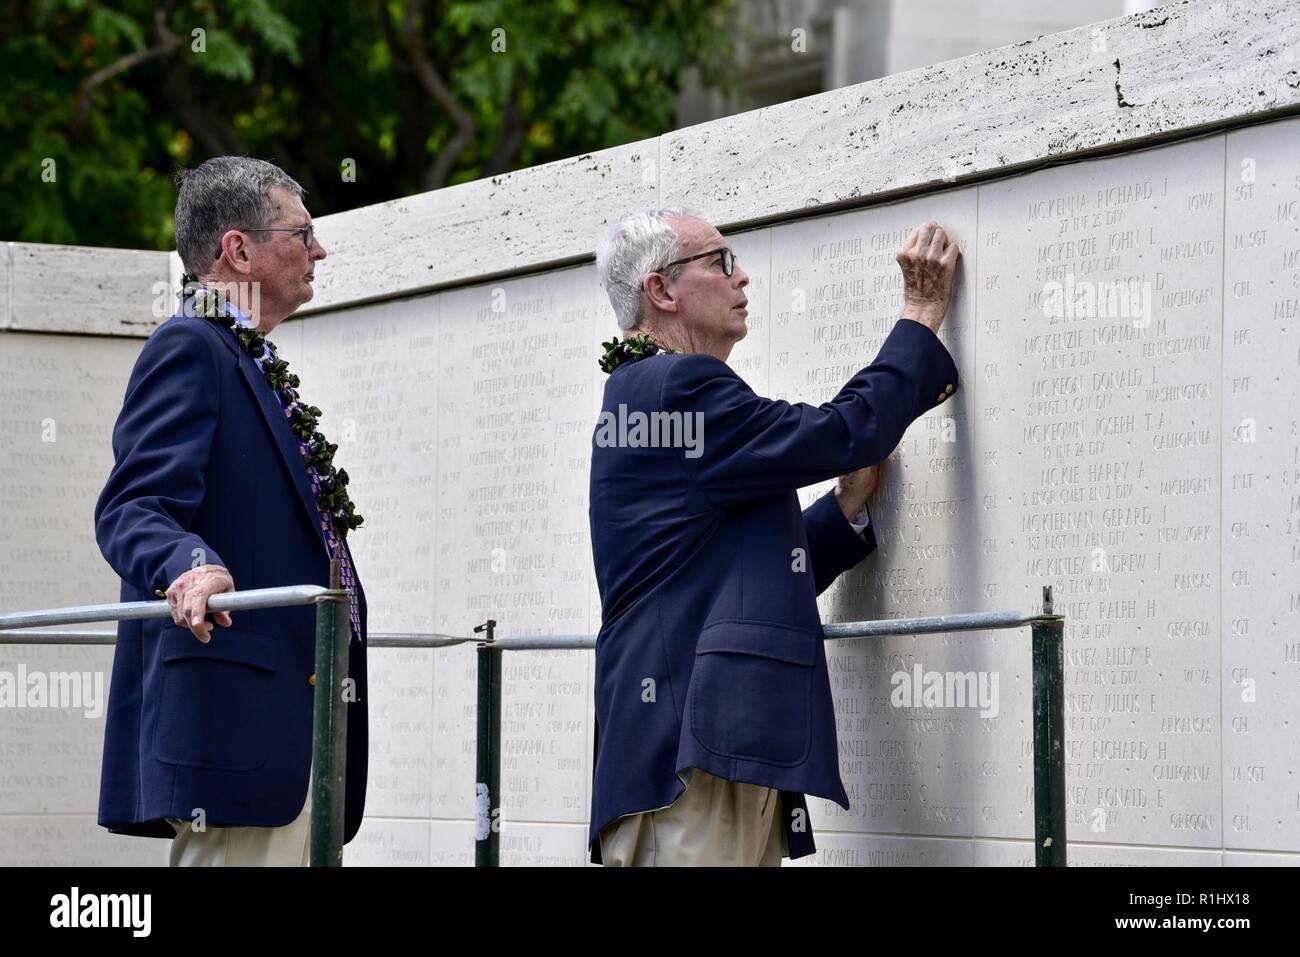 U.S. Army Col. (Ret.) Charles H. McDaniel Jr., watches his brother, Larry McDaniel, place a rosette next to their father's name, U.S. Army Master Sgt. Charles H. McDaniel Sr., at the National Memorial Cemetery of the Pacific, Honolulu, Hawaii, Sept. 21, 2018. McDaniel Sr., was recently identified by the Defense POW/MIA Accounting Agency after his remains were returned during a unilateral transfer from the Democratic People’s Republic of Korea. Stock Photo